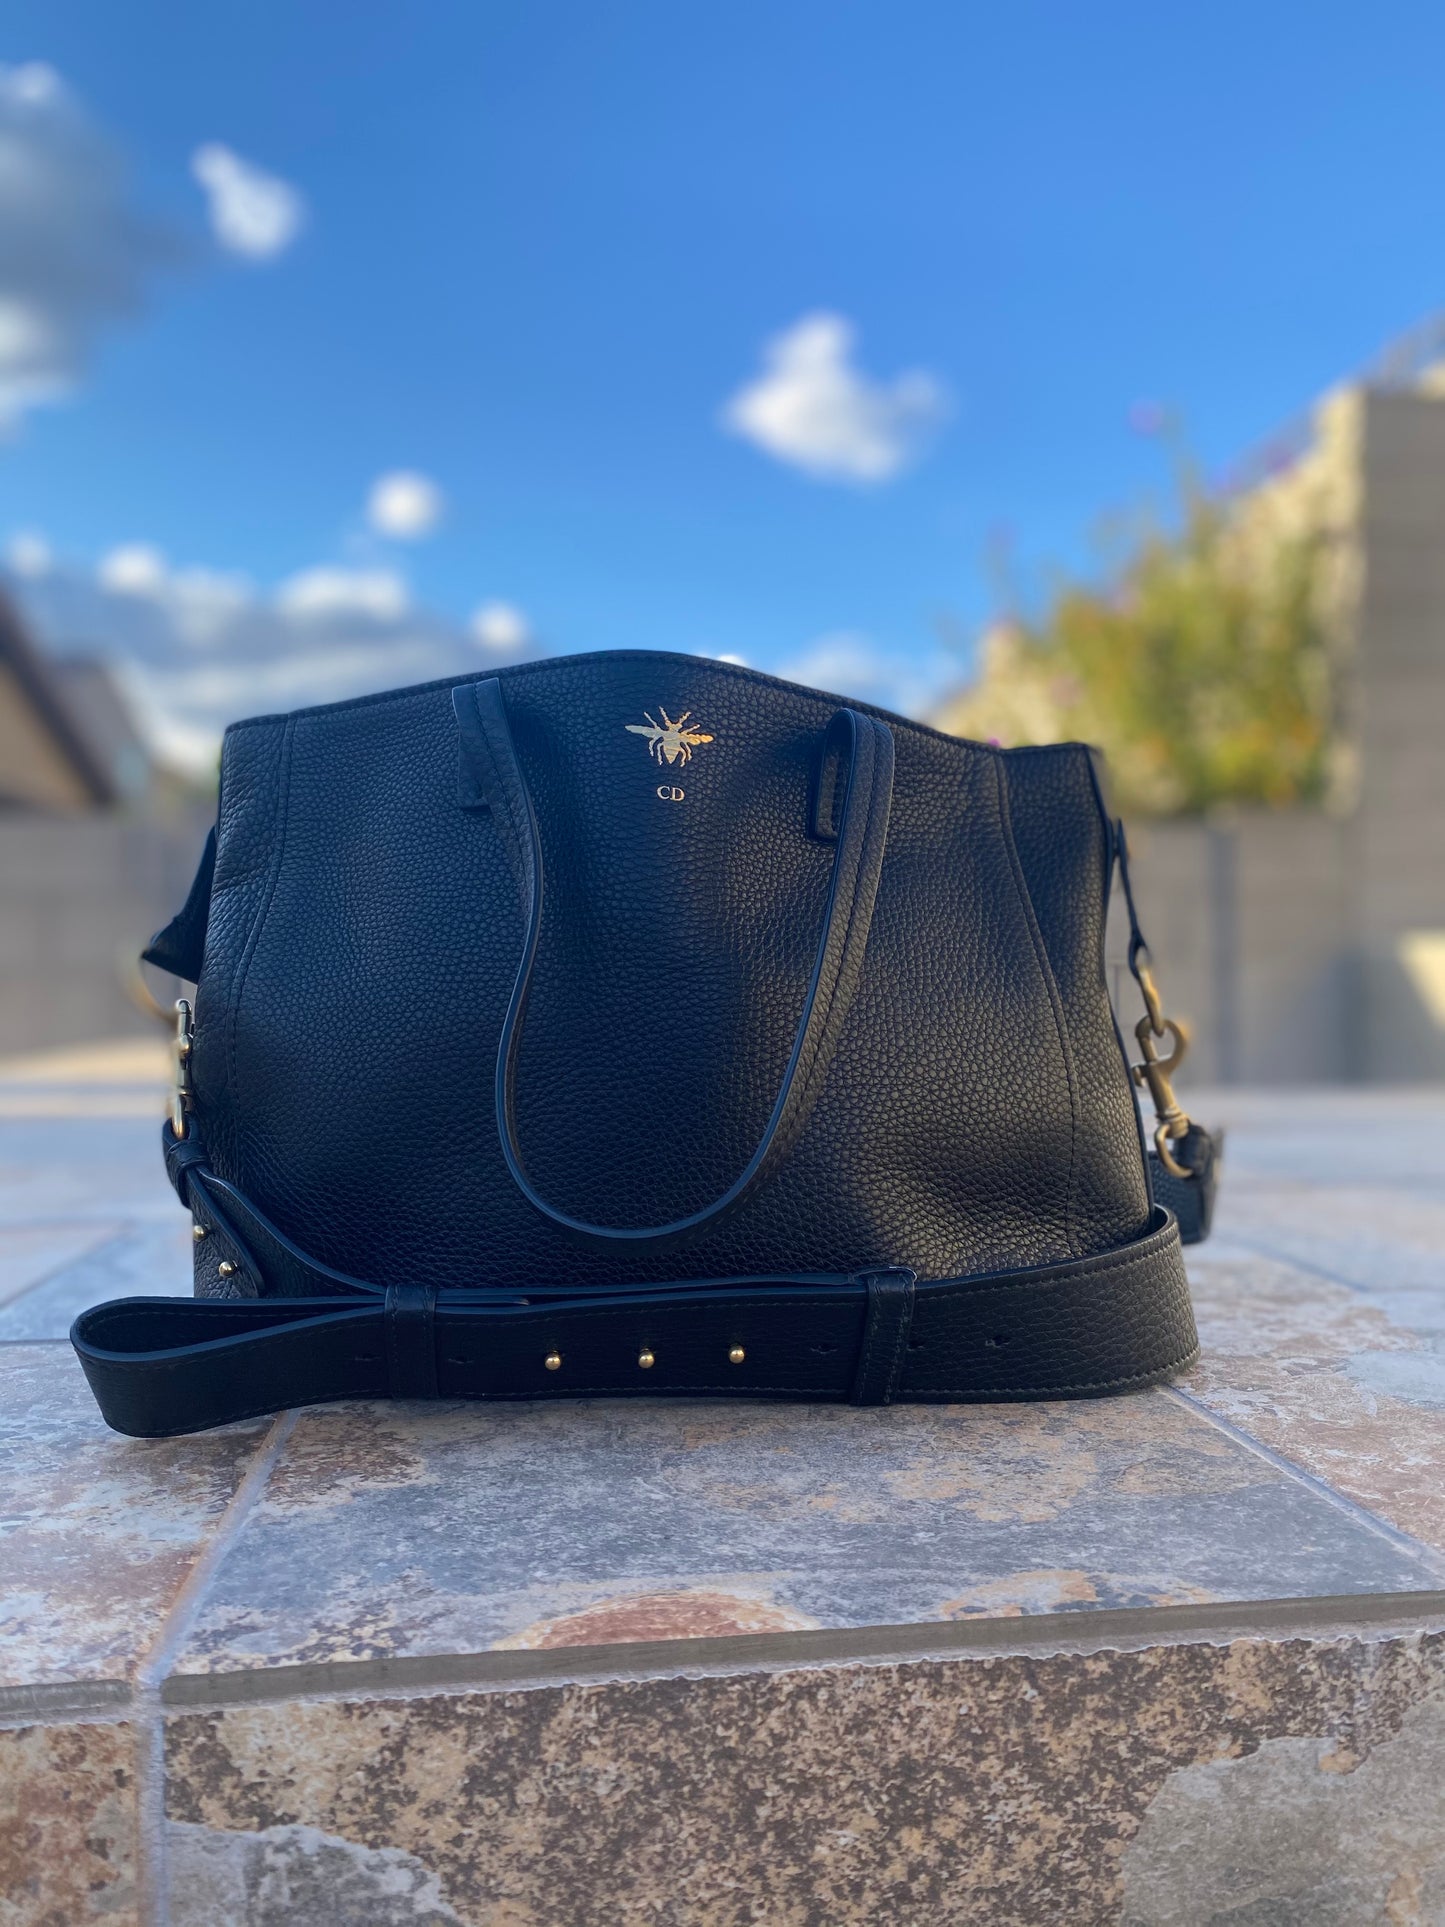 Christian Dior D-Bee Leather Tote